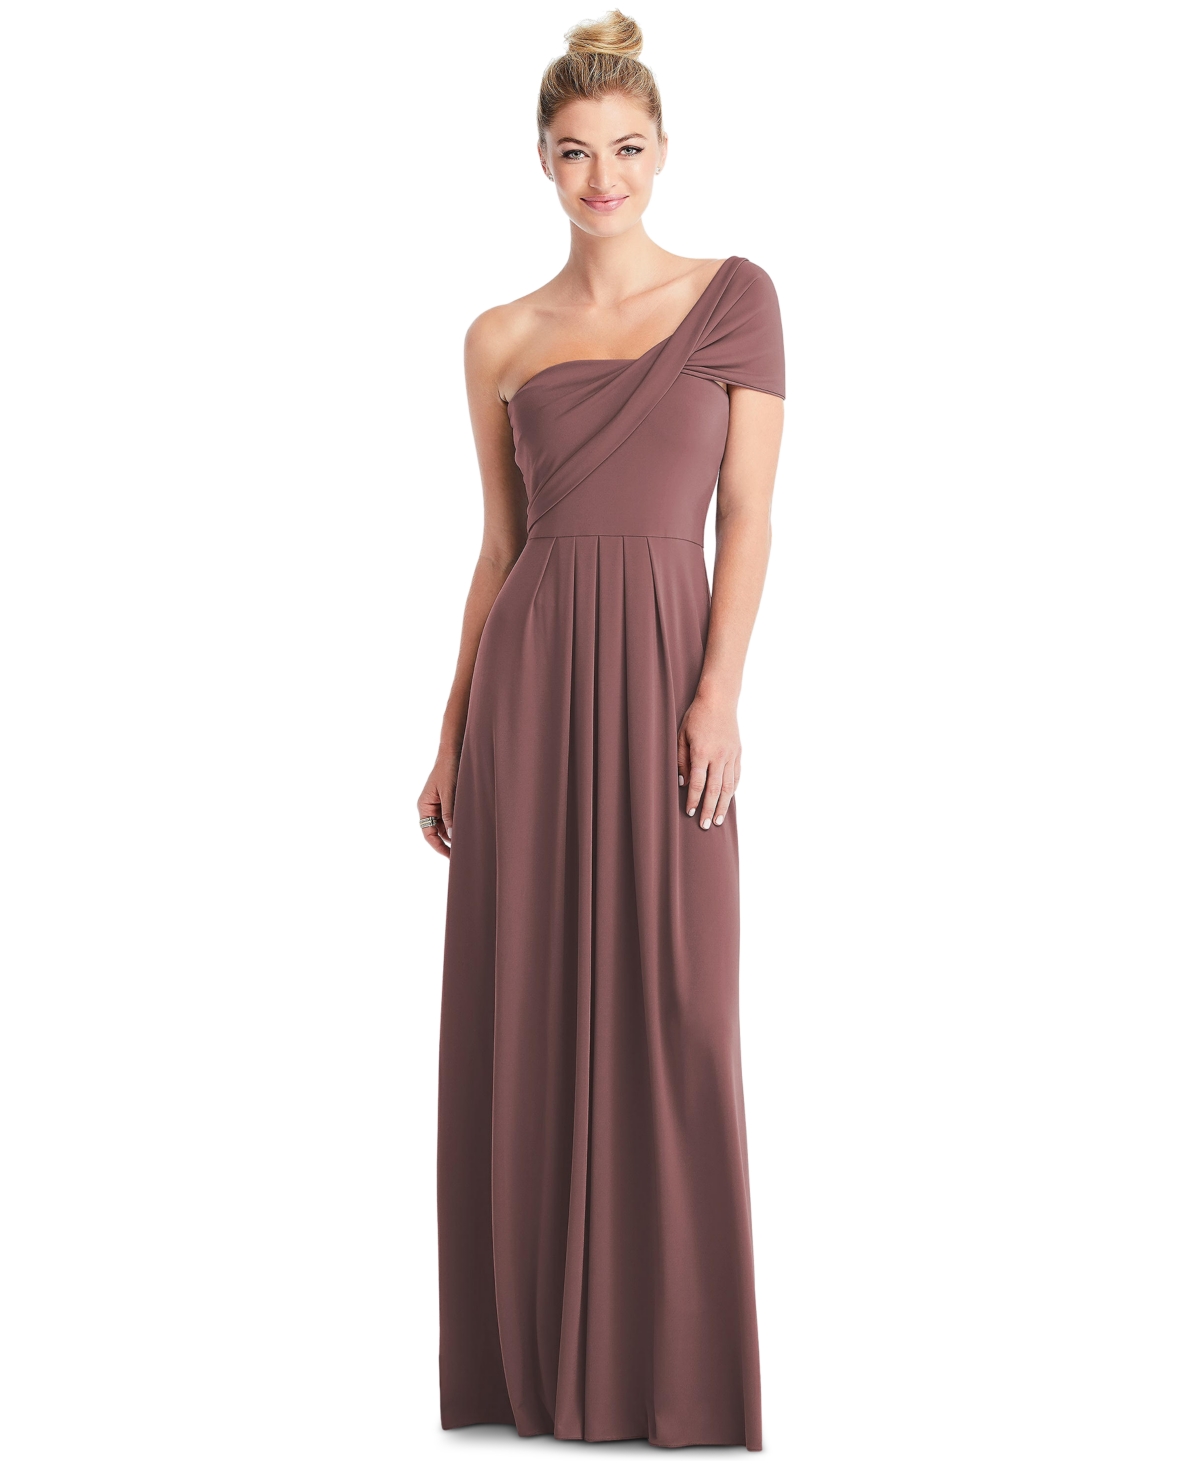 Dessy Collection Full-Length Loop Convertible Dress & Removable Shrug